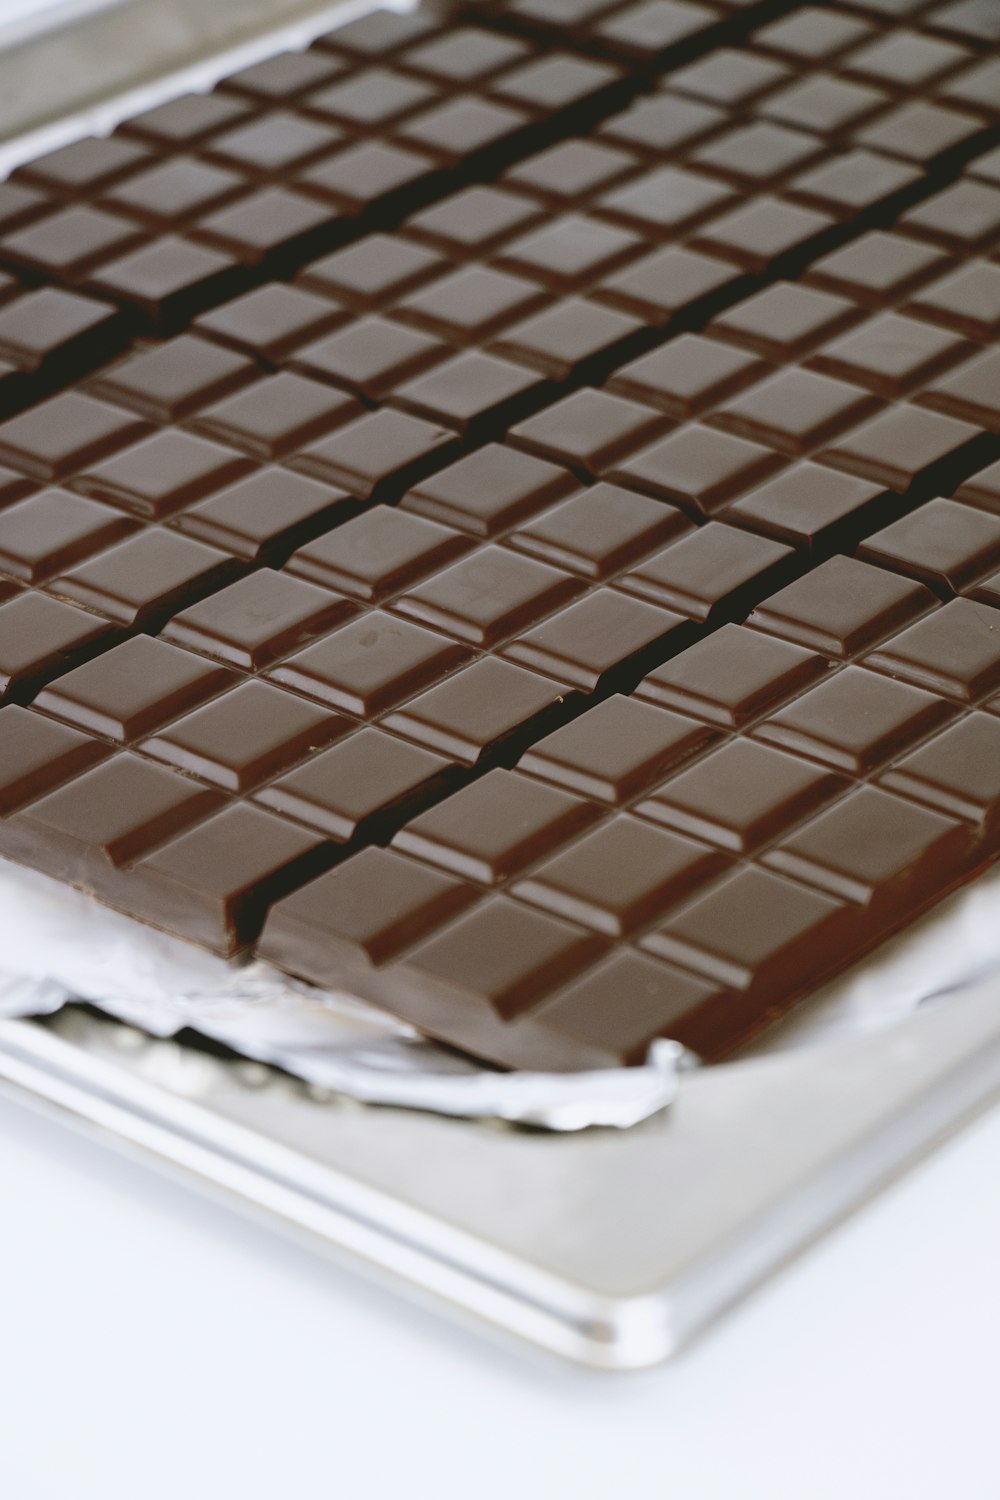 a close up of a chocolate bar on a tray